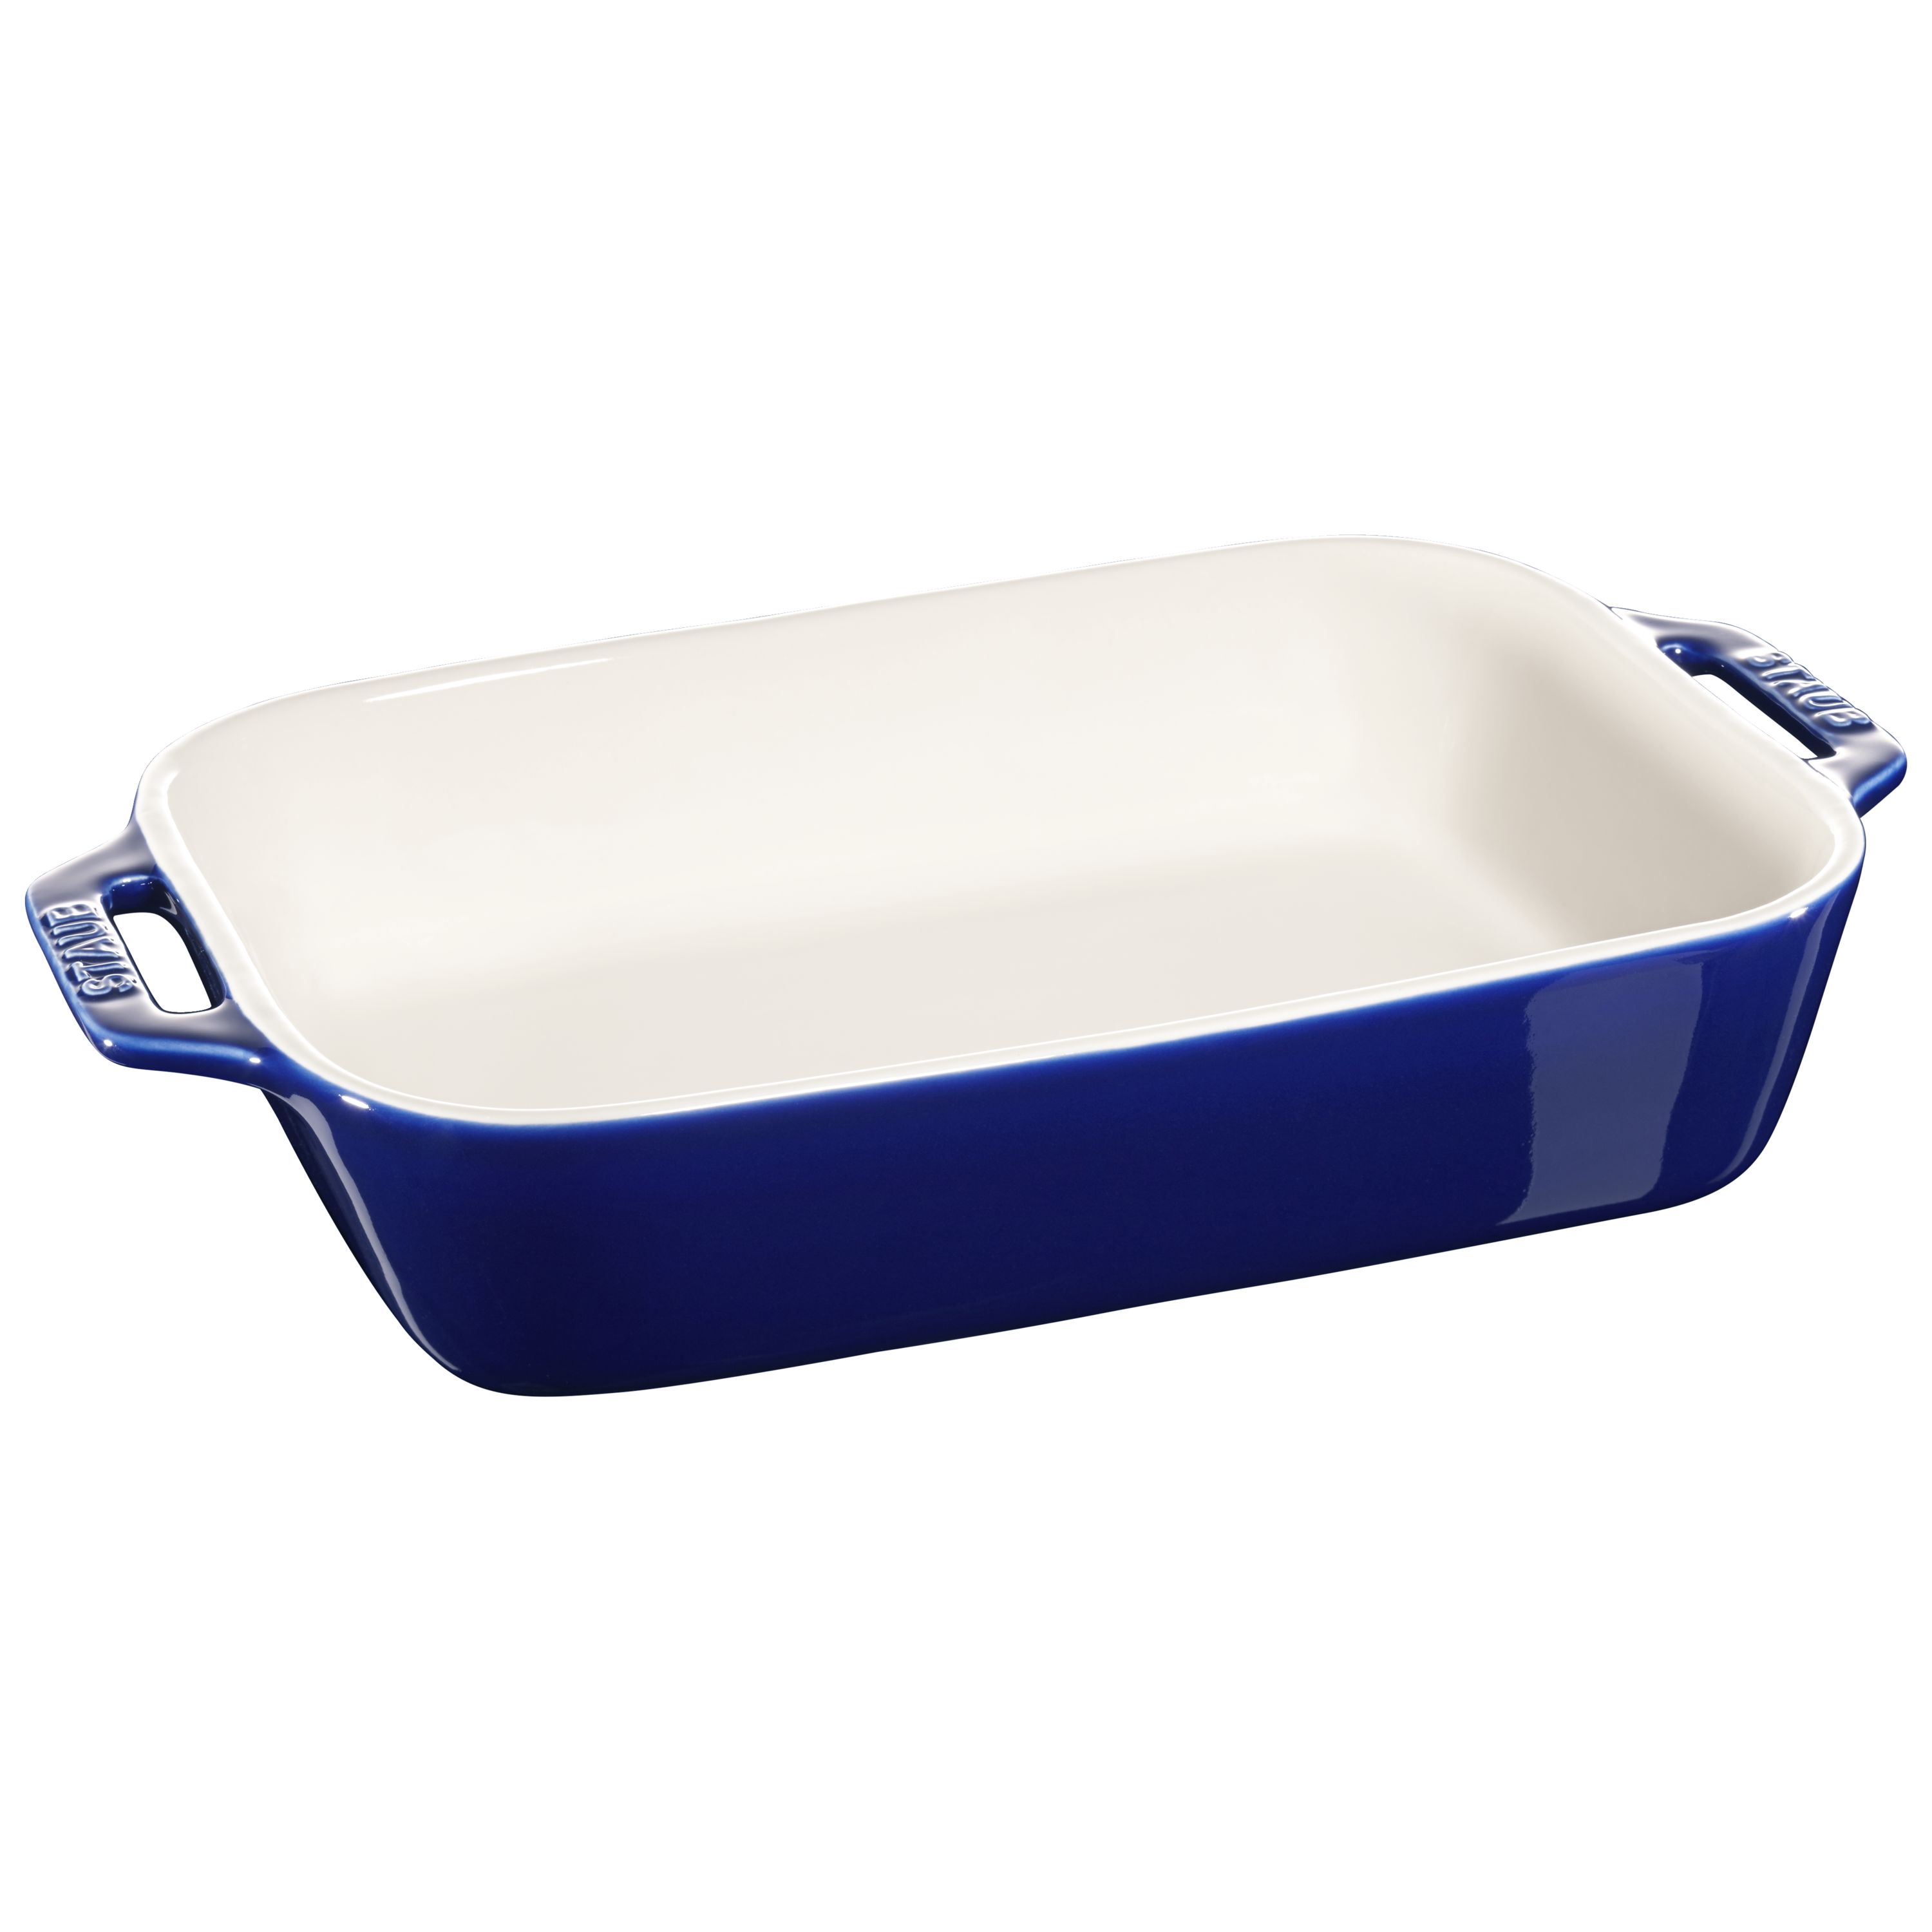 3 red 1 blue of Casserole Dish Ceramic 2L with Lid Oven Baking Roasting Pot  Pan